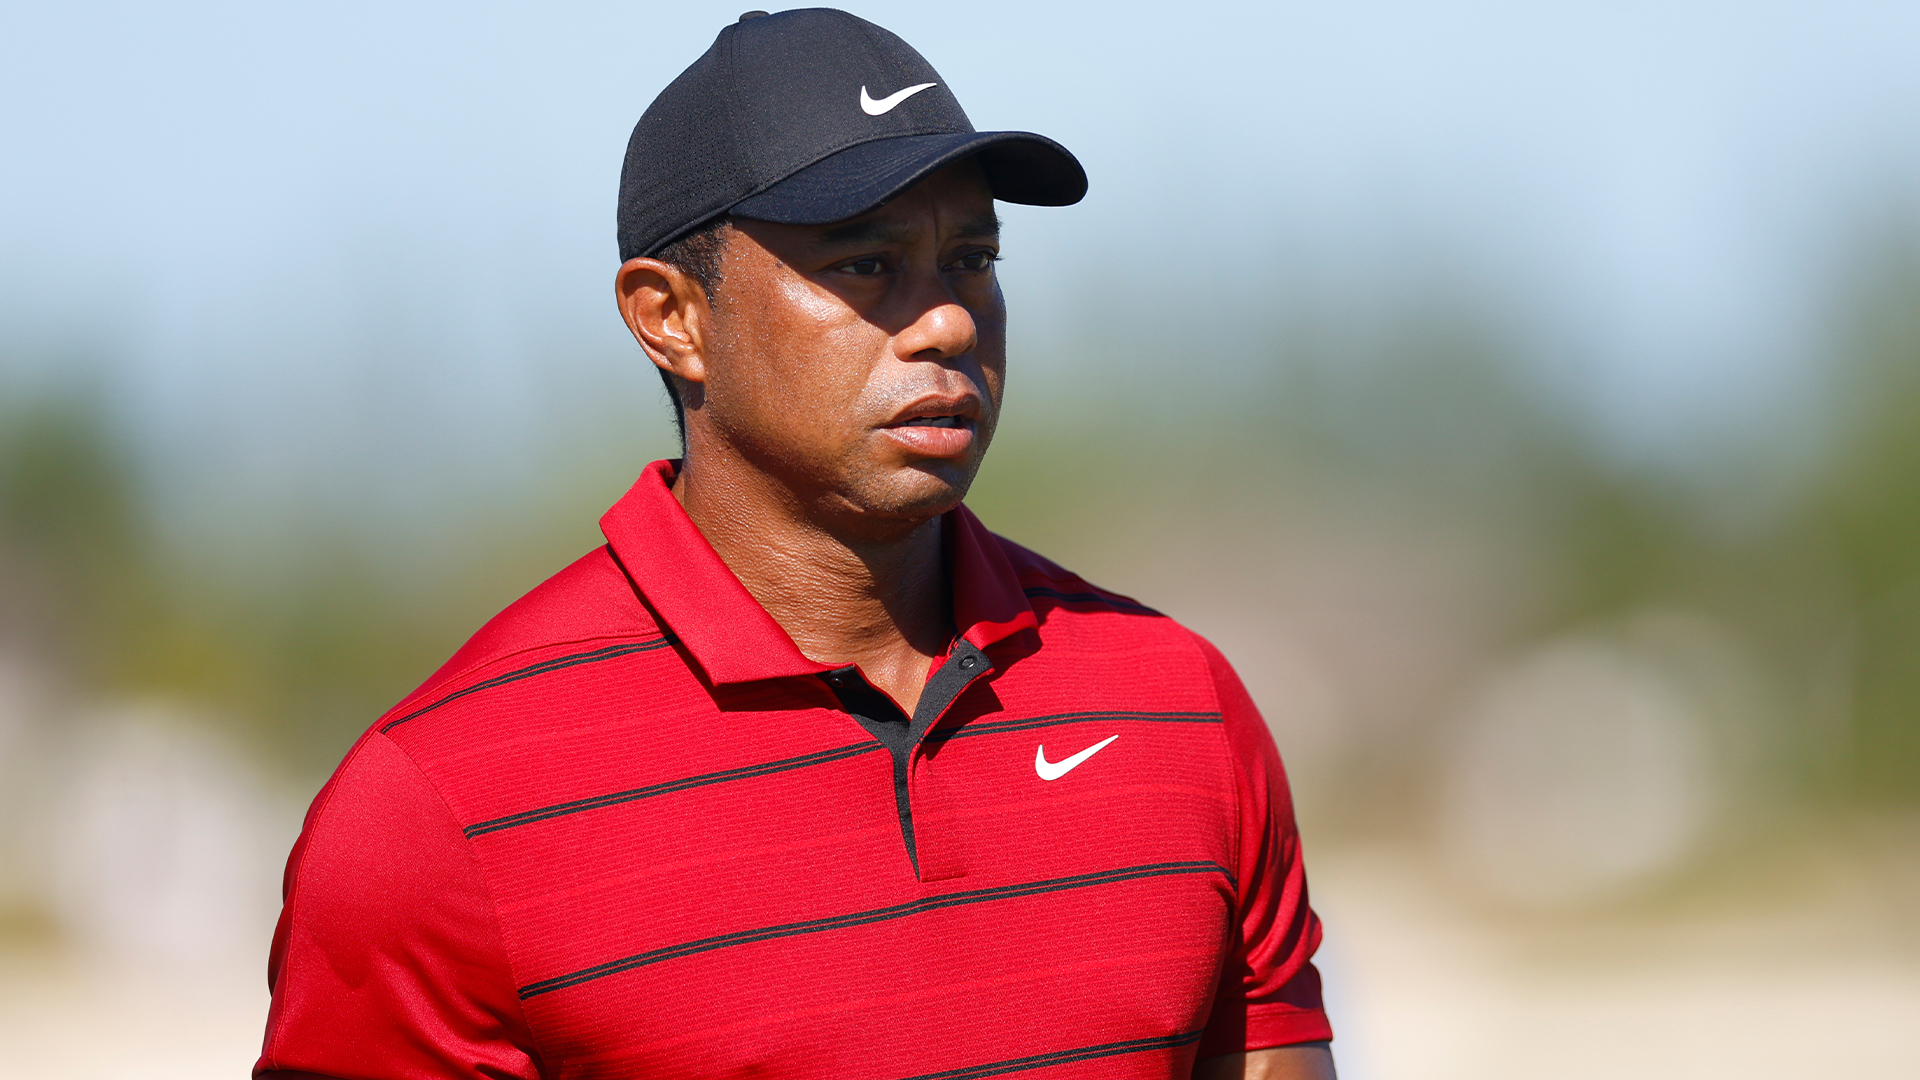 Tiger Woods' Partnership With Nike, Which Reportedly Netted Him $500M, Has Reached An End After 27 Years